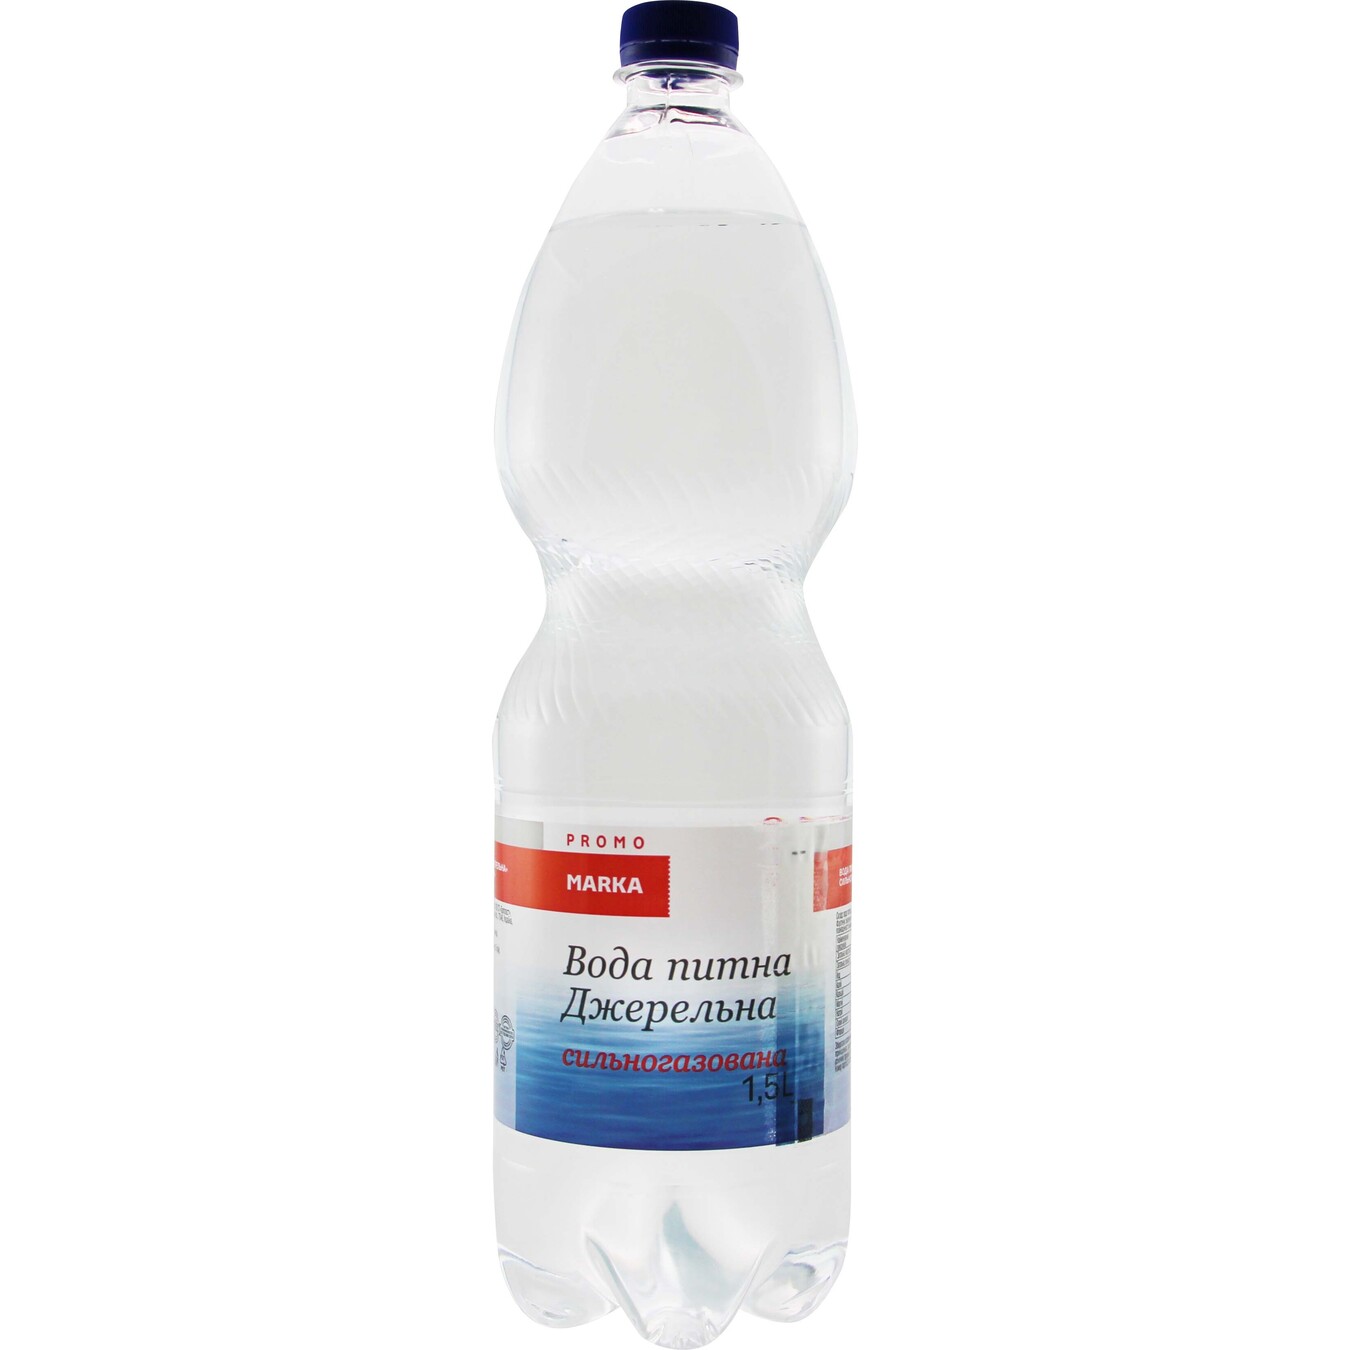 Marka Promo Dzherel'na Highly Carbonated Water 1,5l